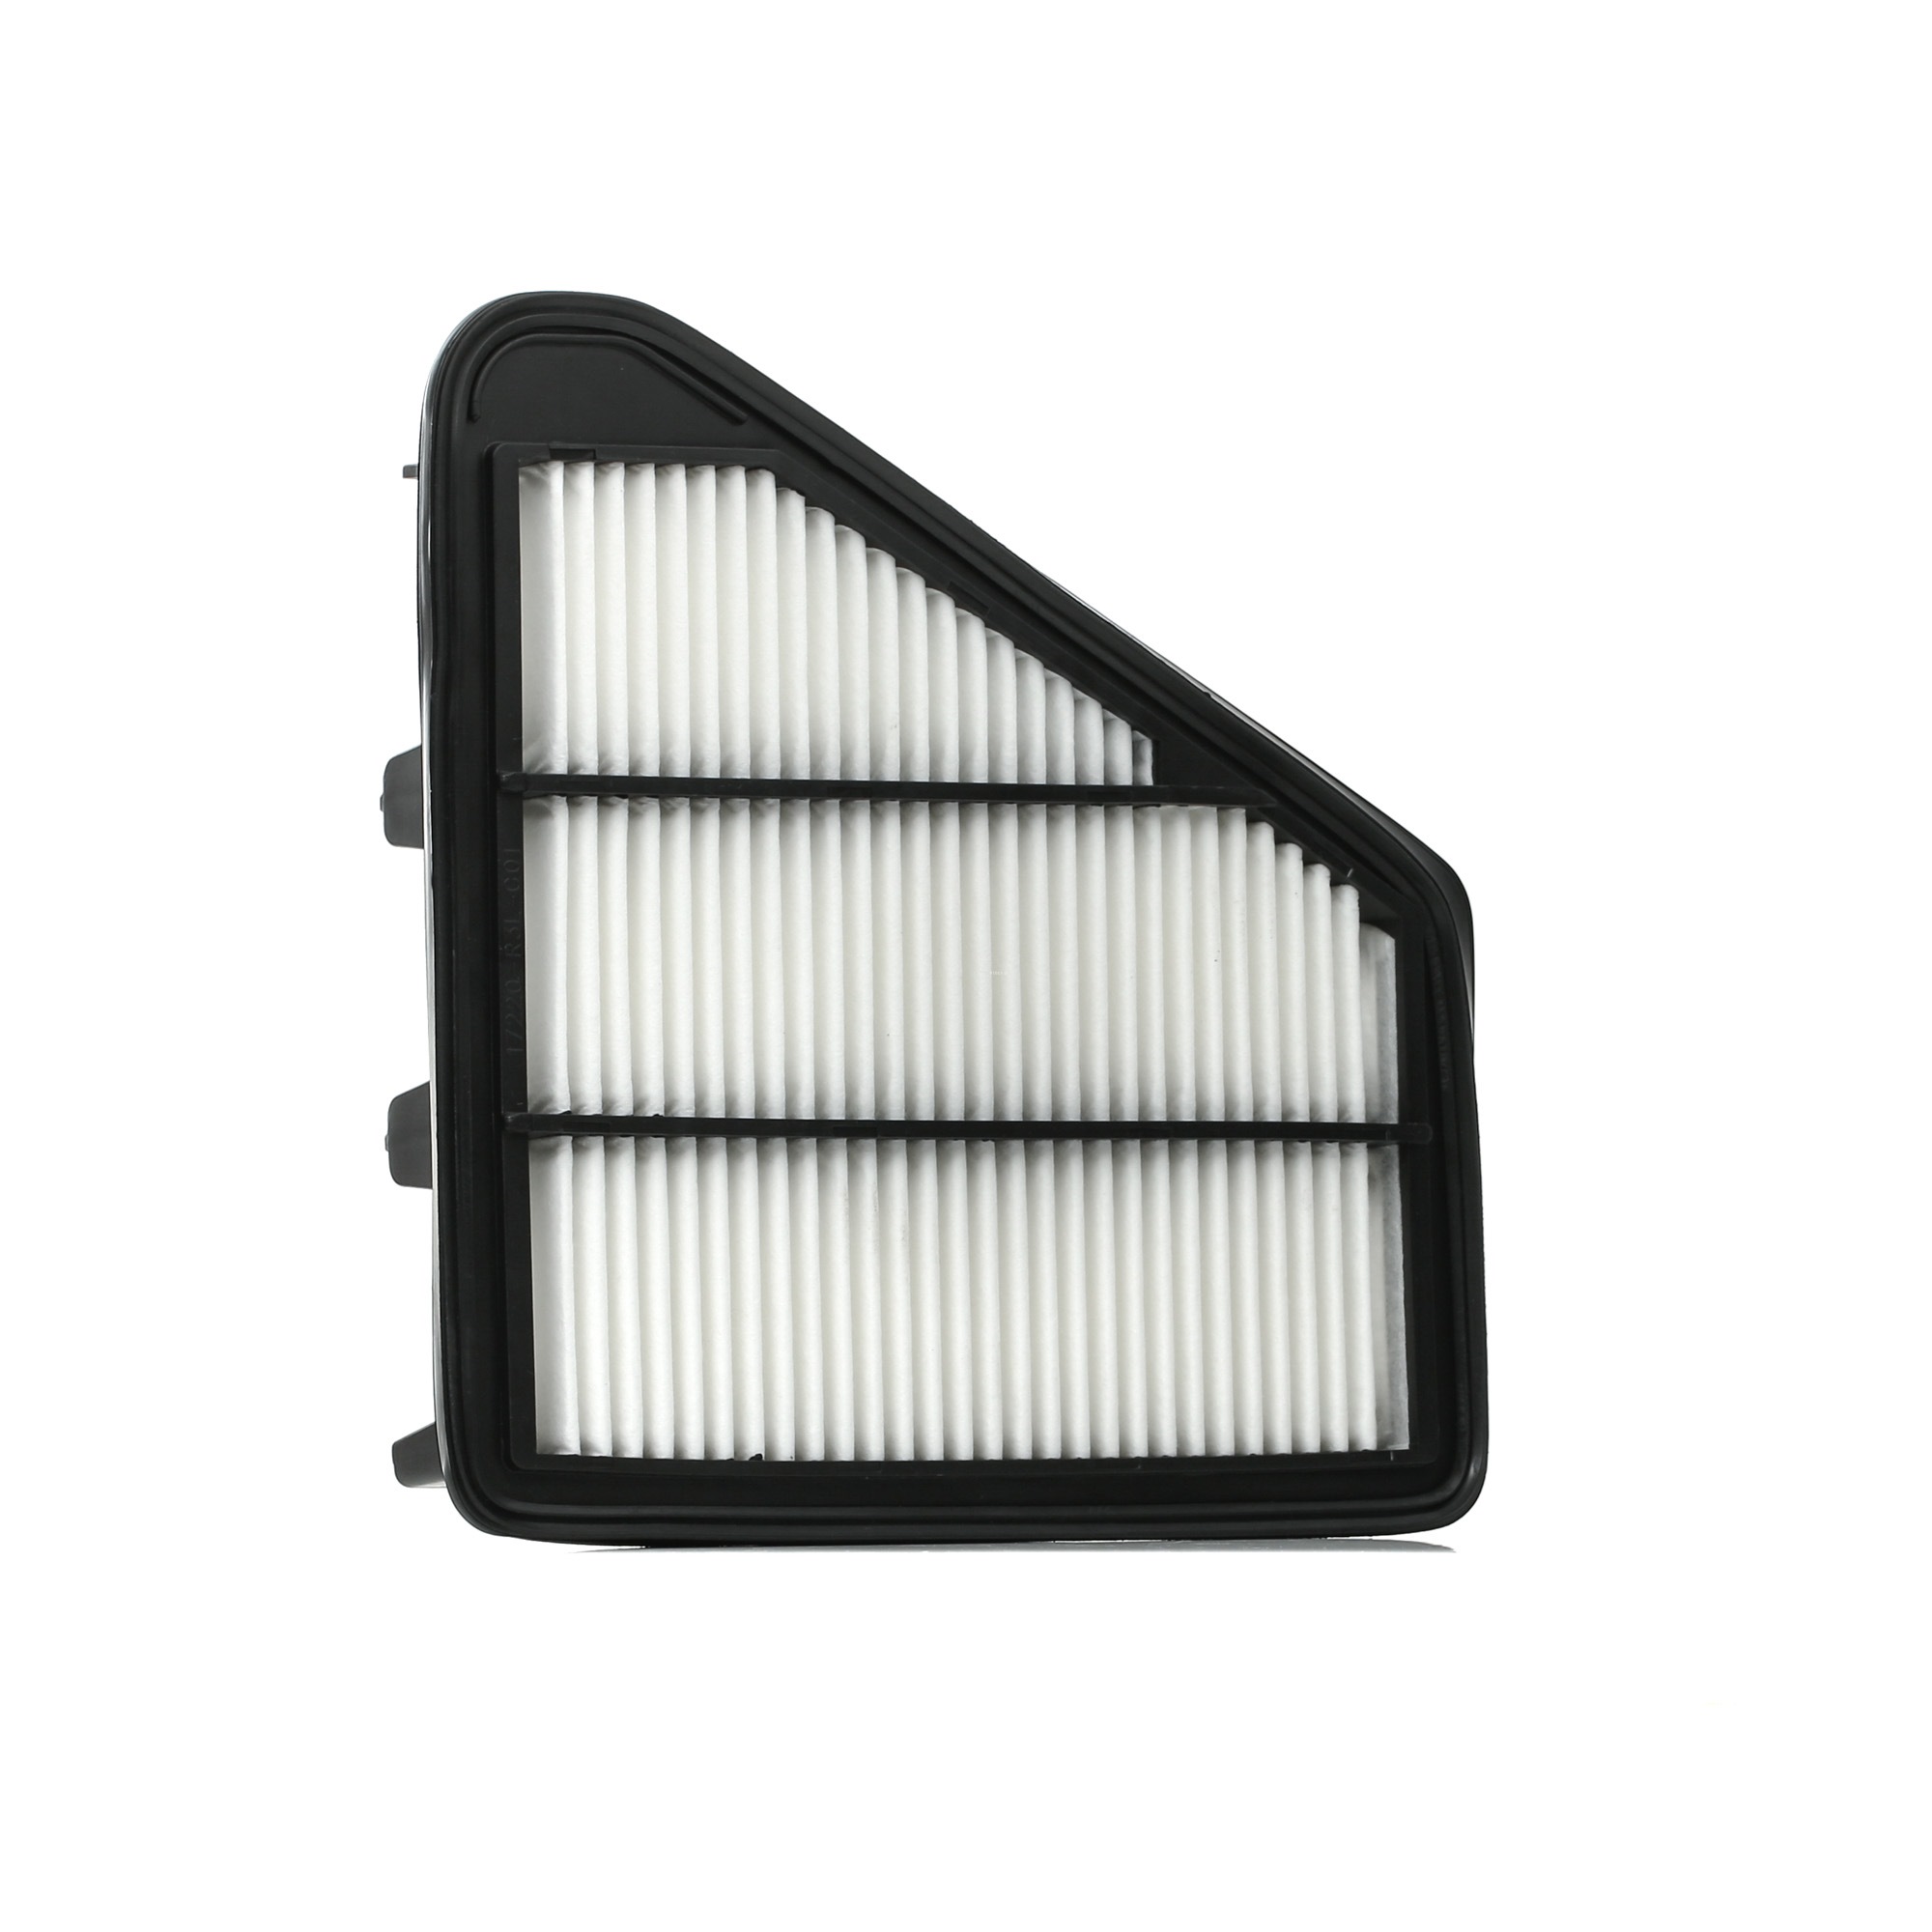 RIDEX 8A0527 Air filter cheap in online store